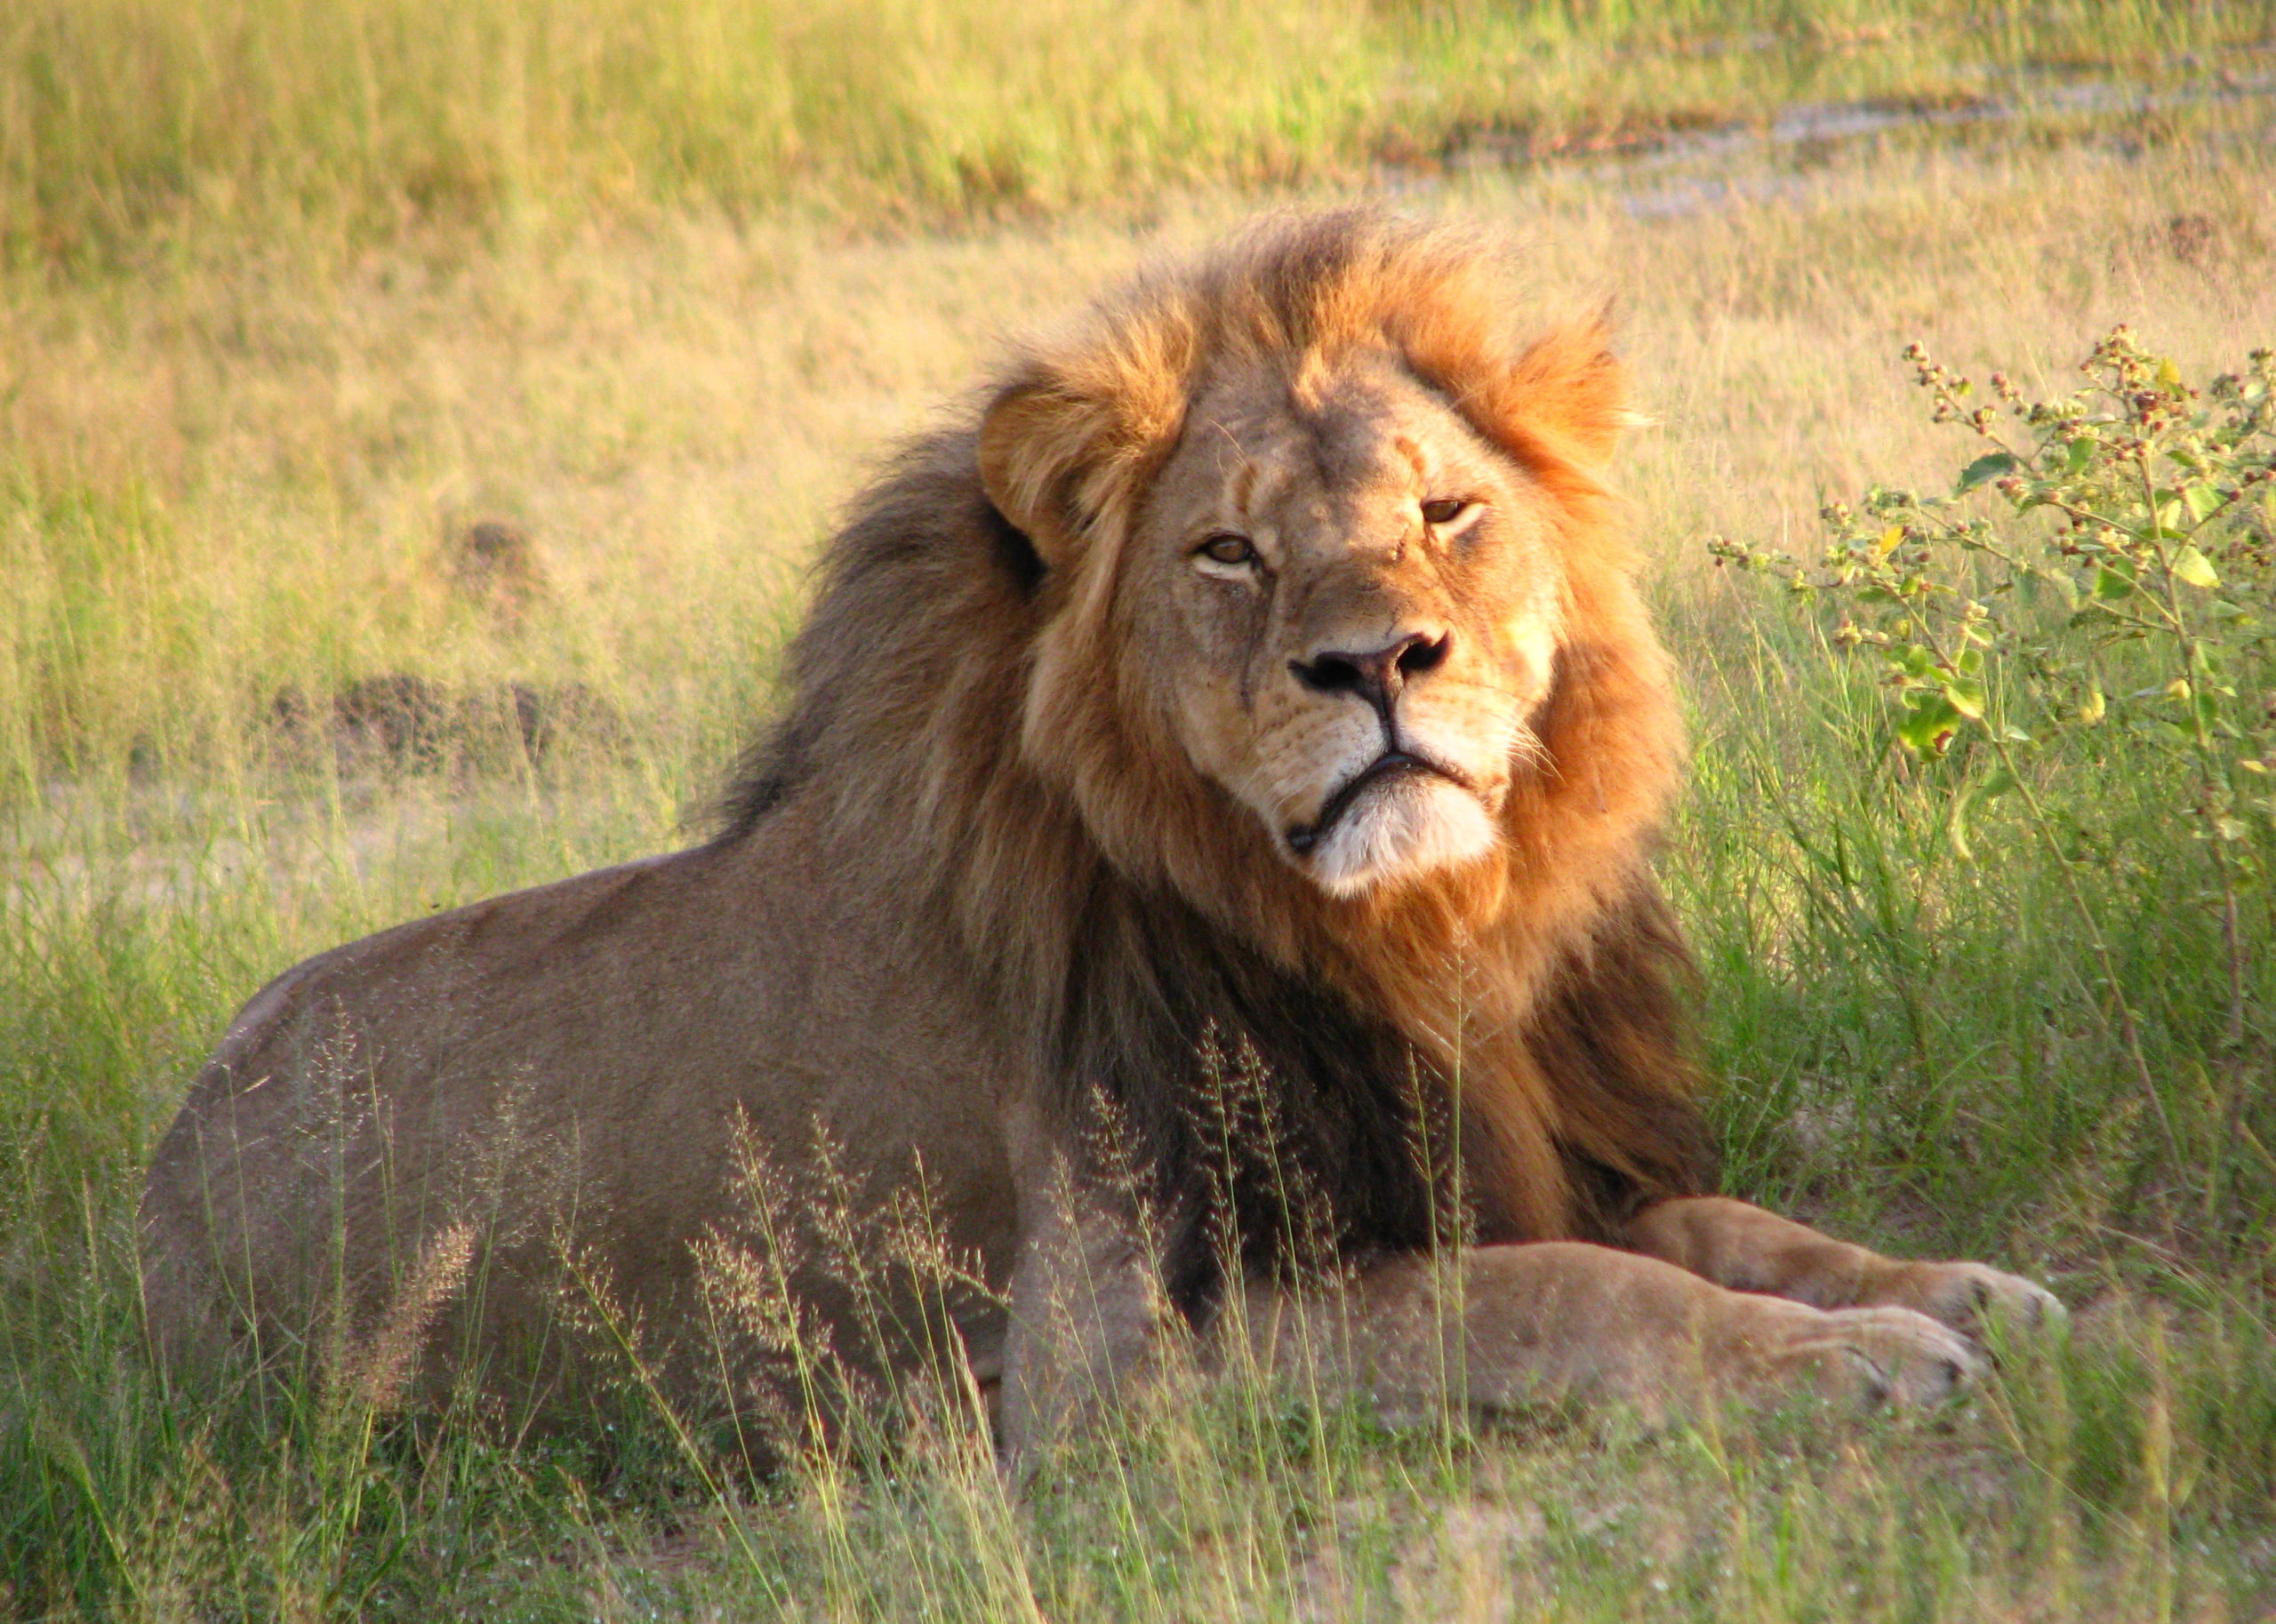 Why Do You Care About Cecil The Lion?